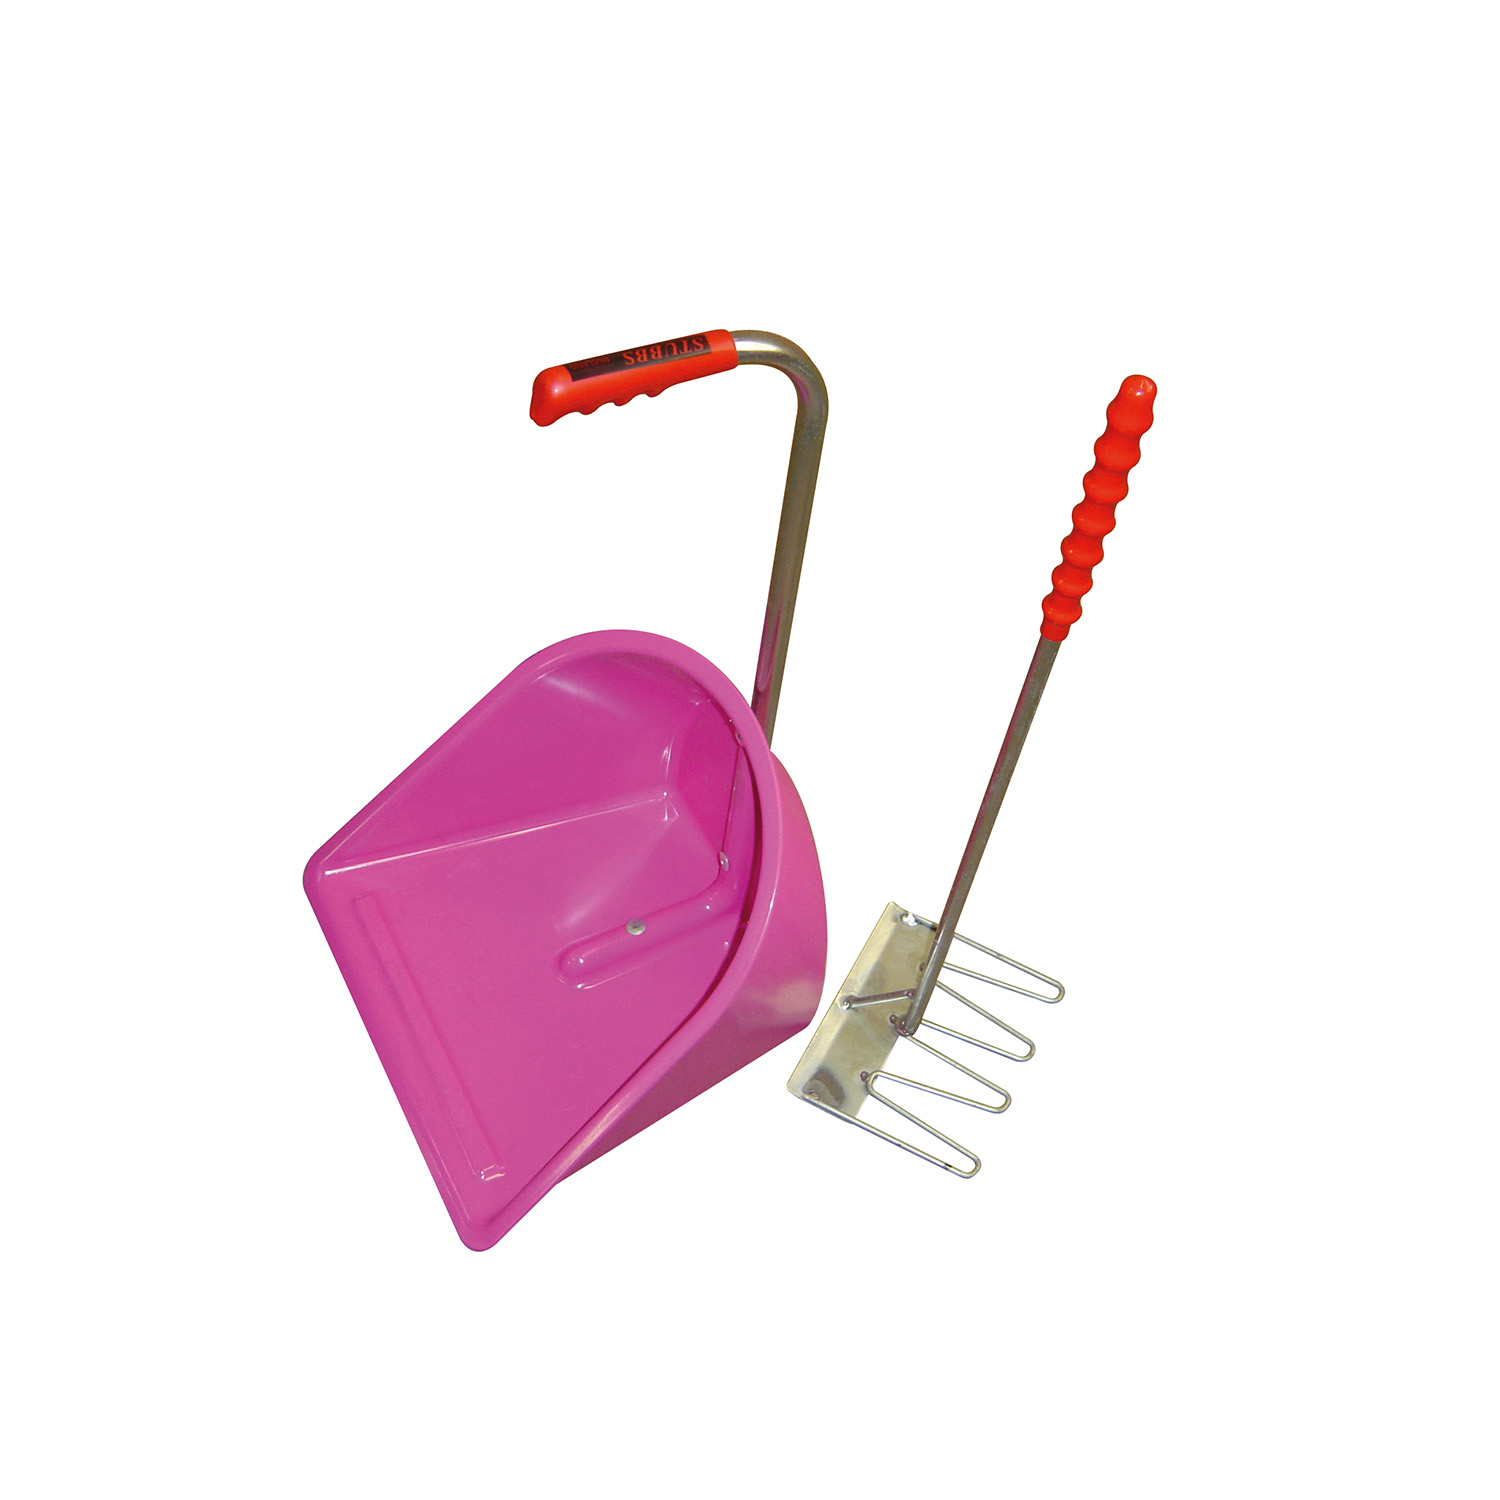 STUBBS STABLE MATE MANURE COLLECTOR C/W RAKE S455 PINK